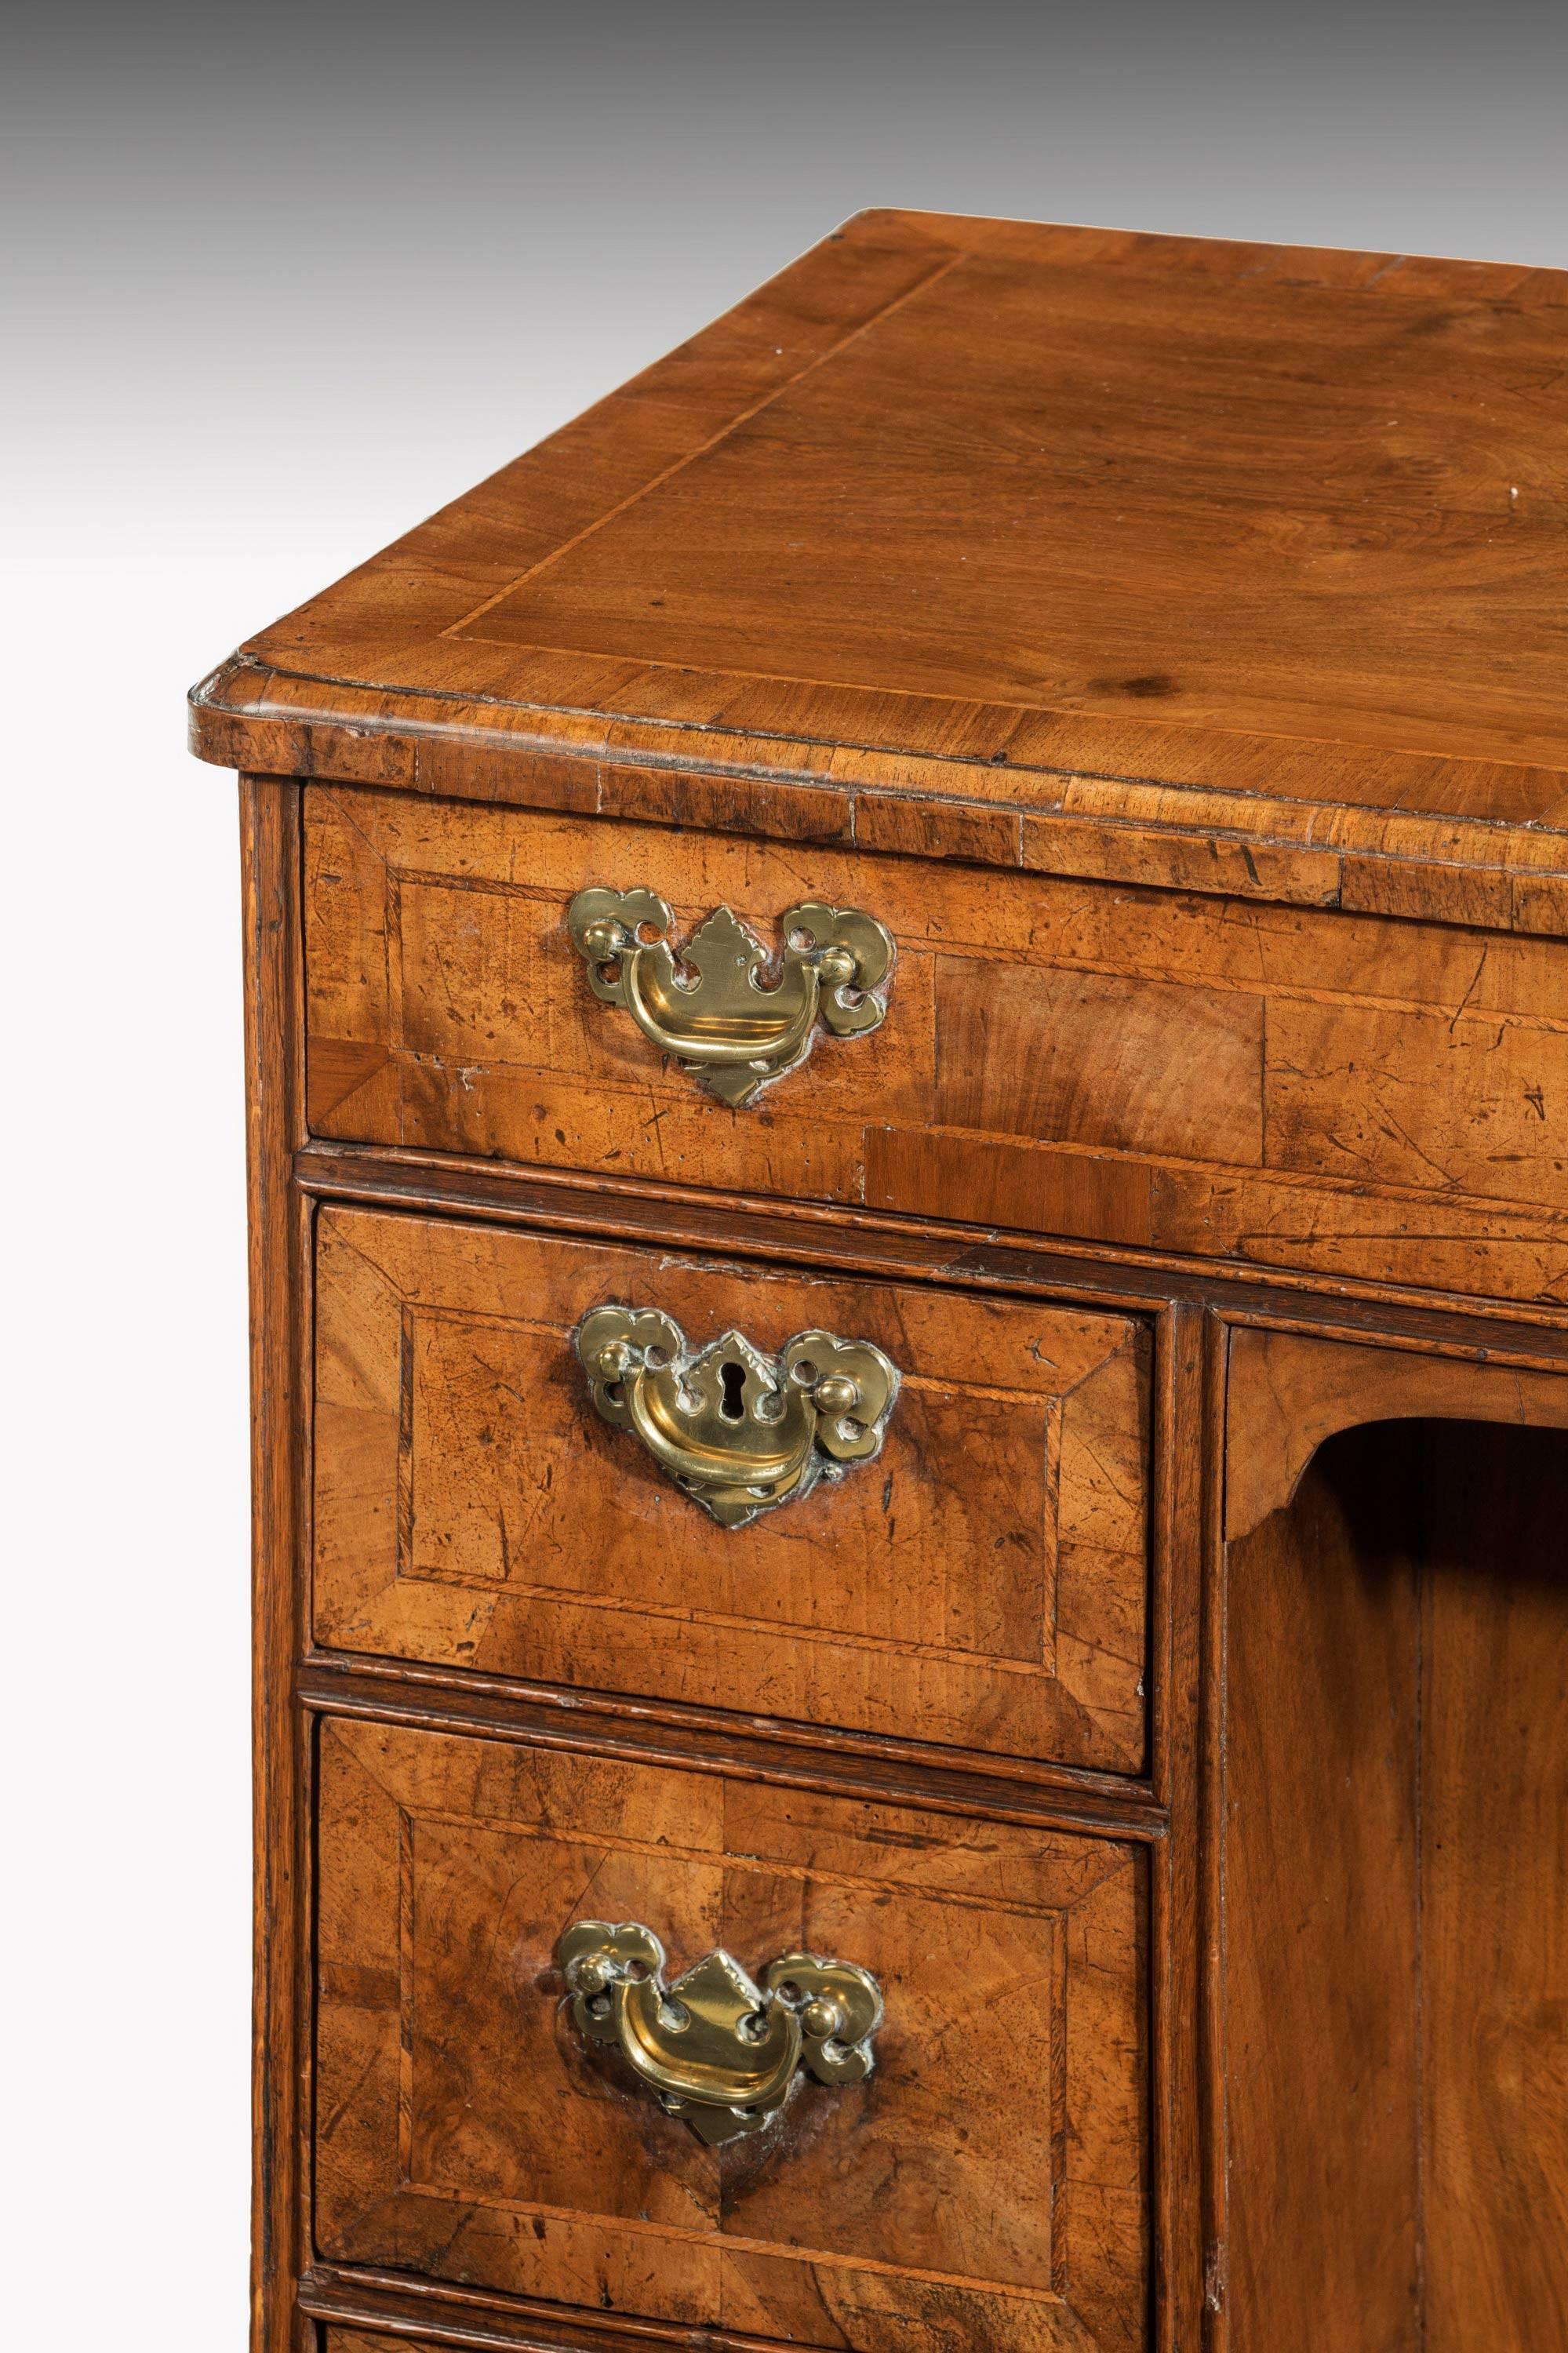 English Mid-18th Century Walnut Kneehole Desk with Excellent Detailing